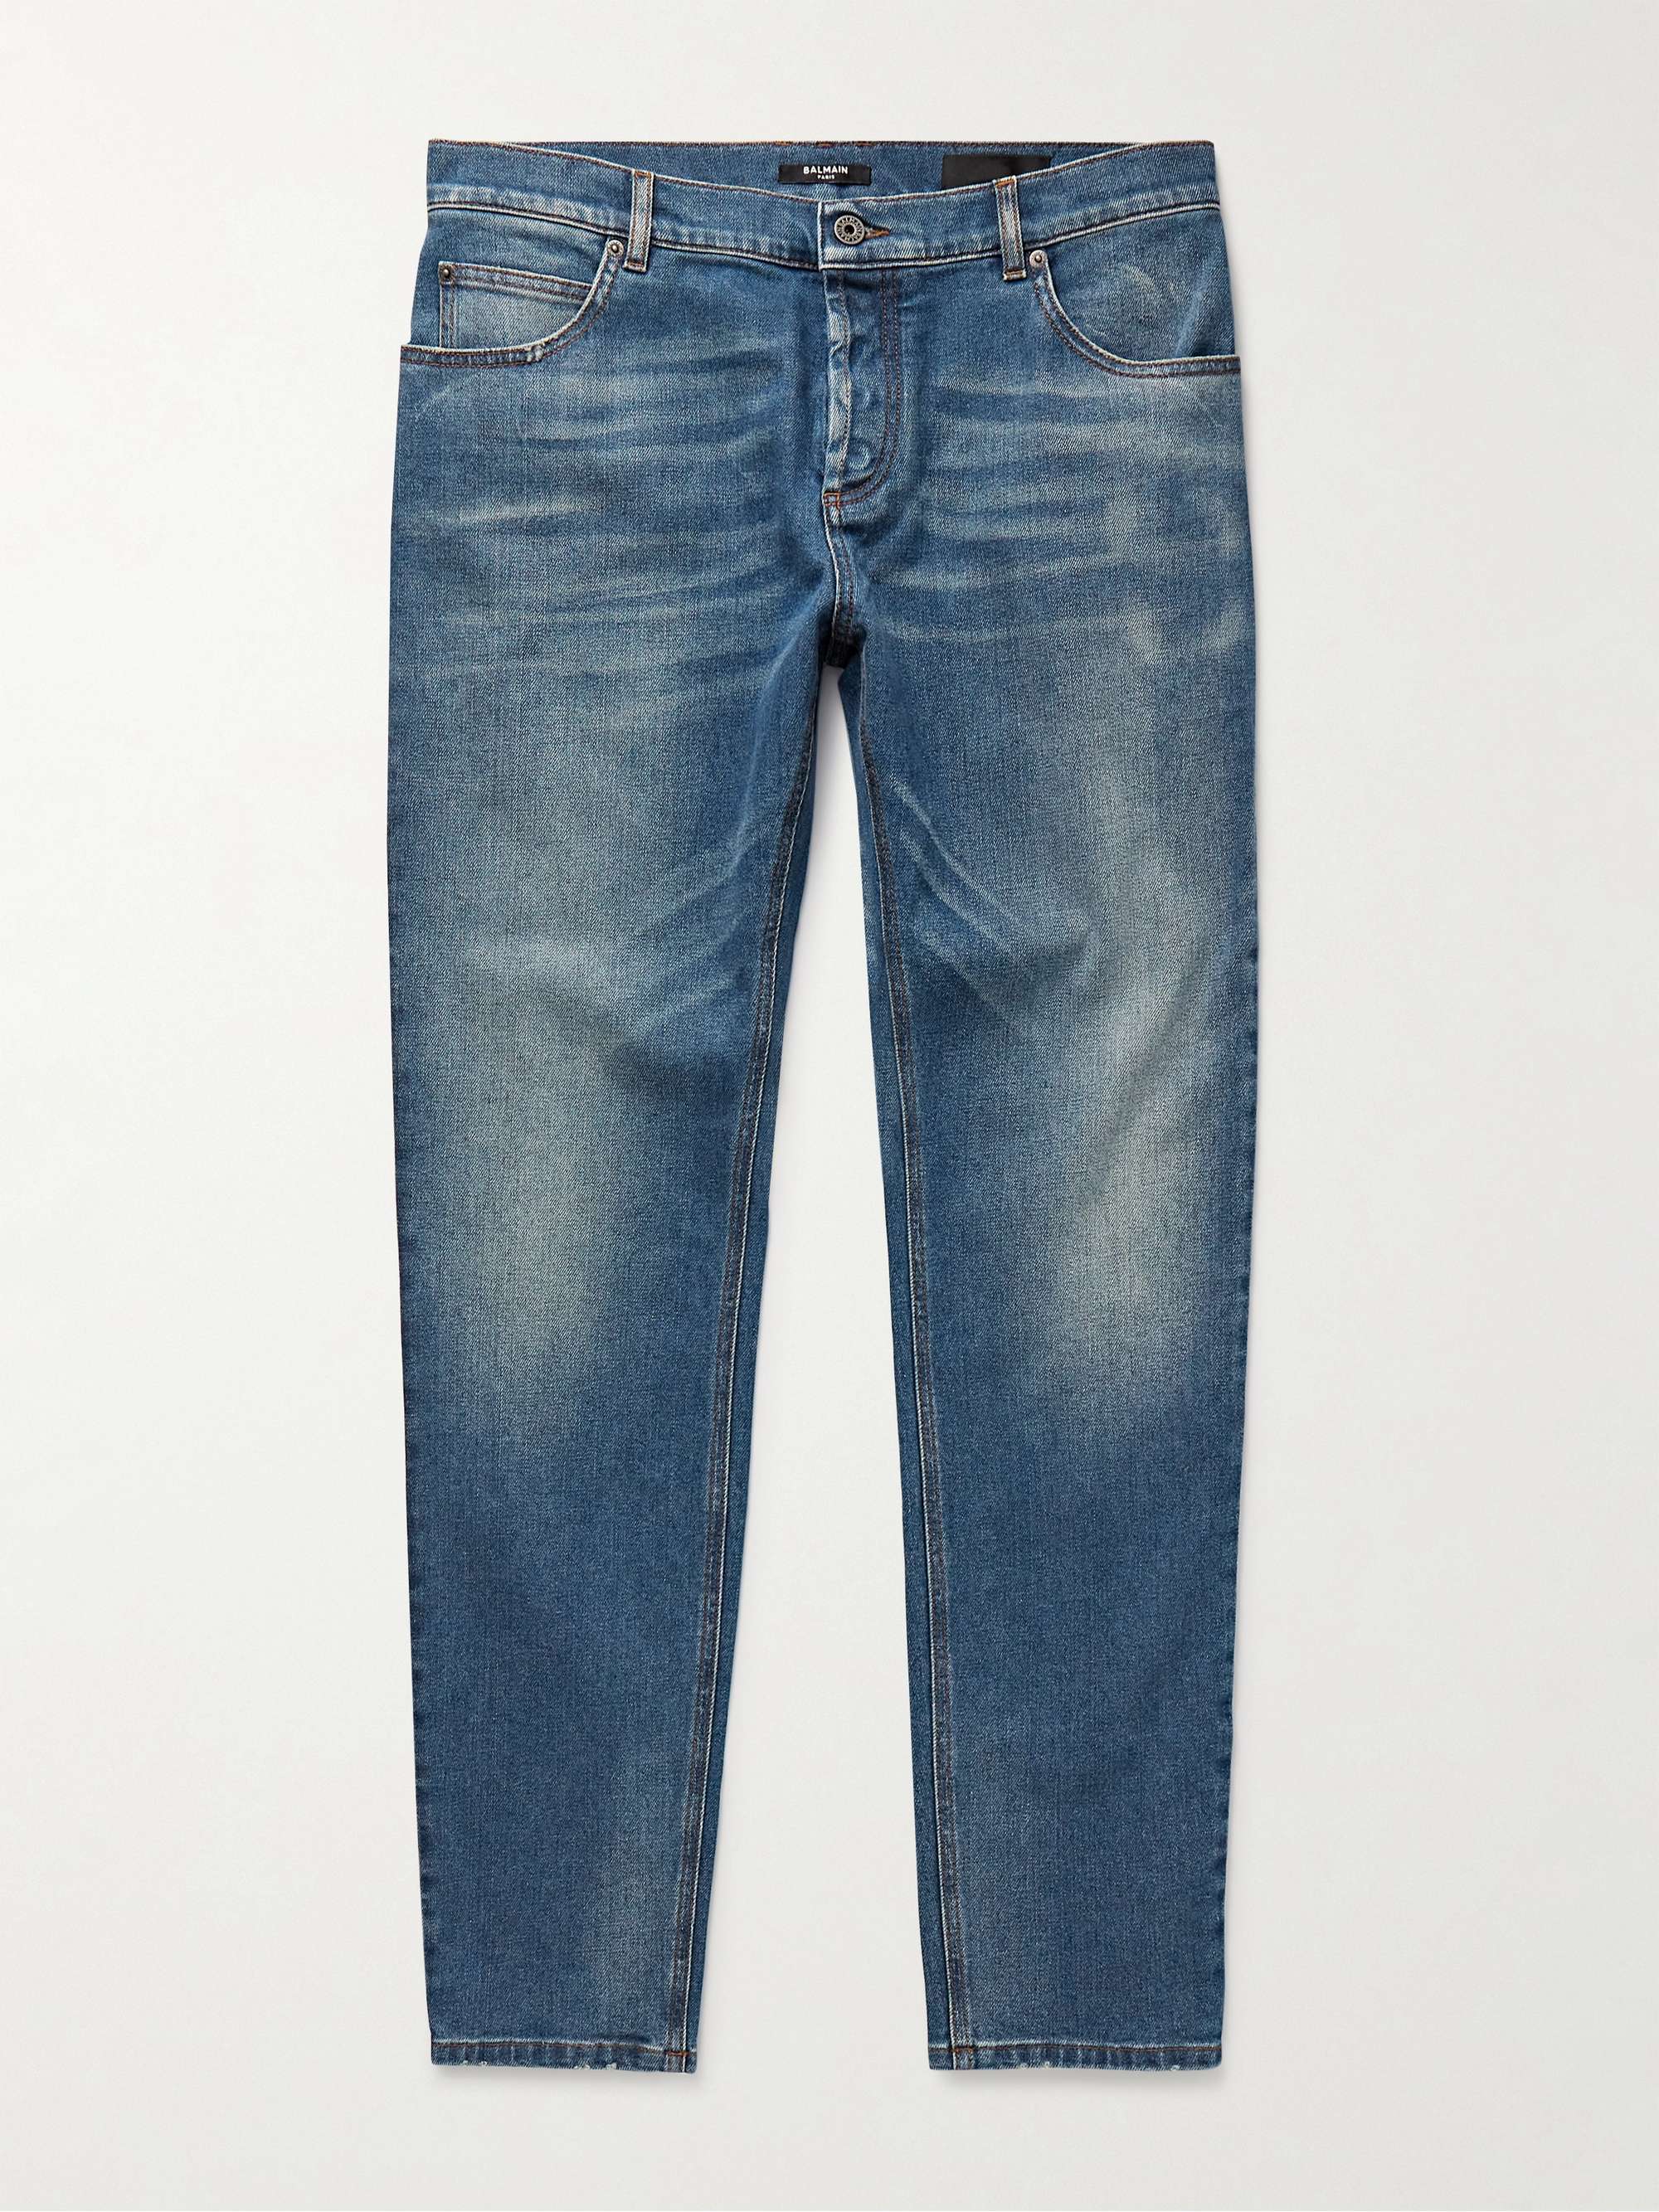 BALMAIN Distressed embroidered denim jeans | THE OUTNET